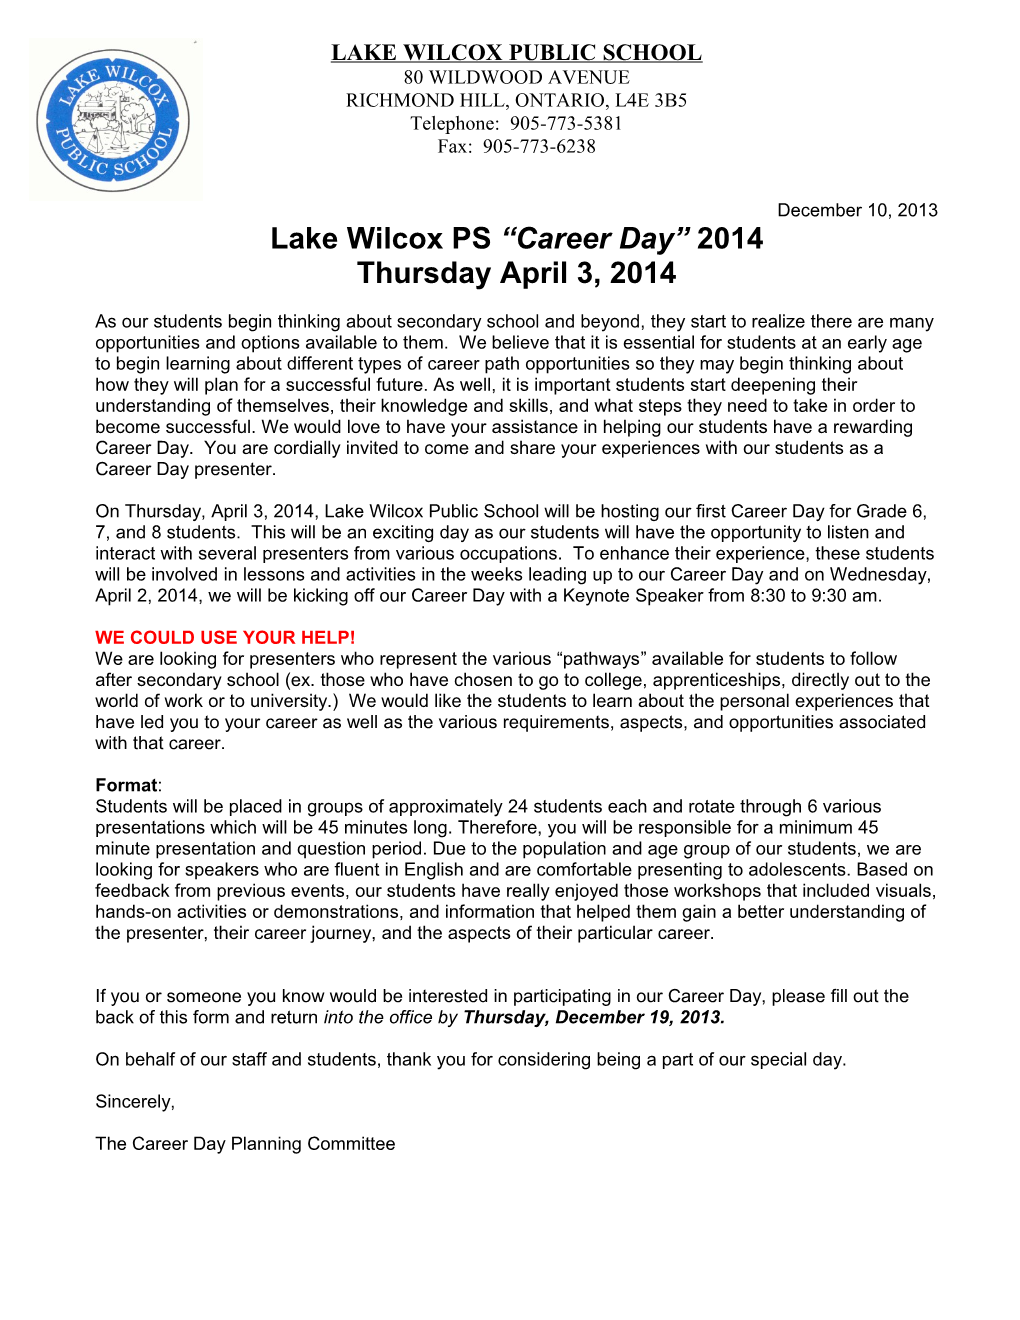 Lake Wilcox PS Career Day 2014